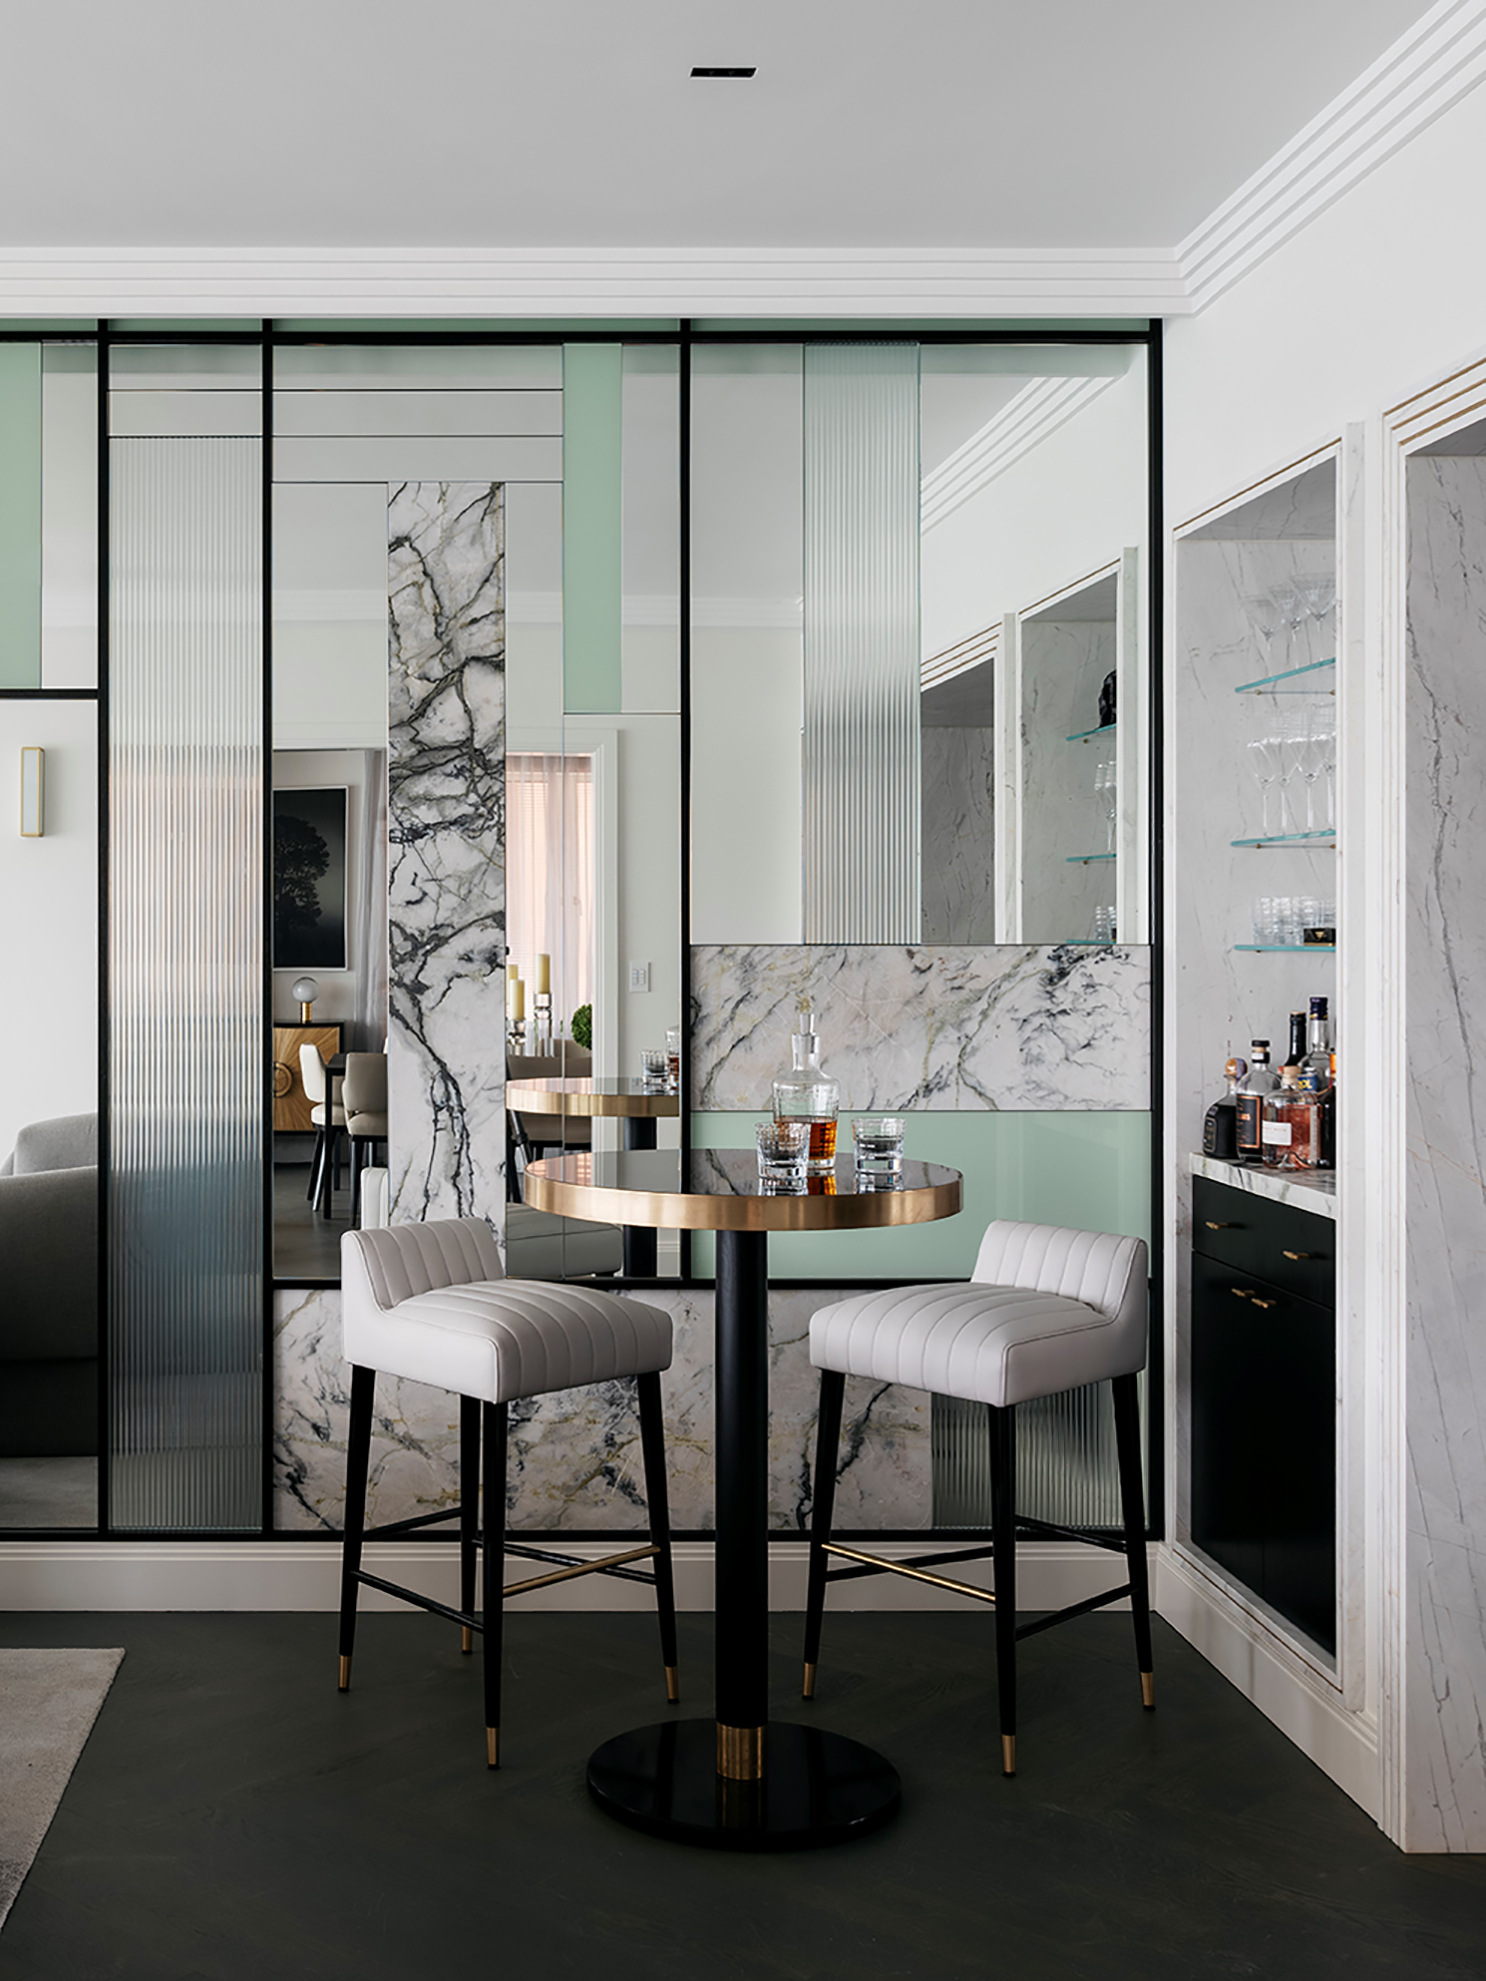 Art deco style home bar renovation with marble architrave and mirror wall, by Sydney interior designers, Brendan Wong Design